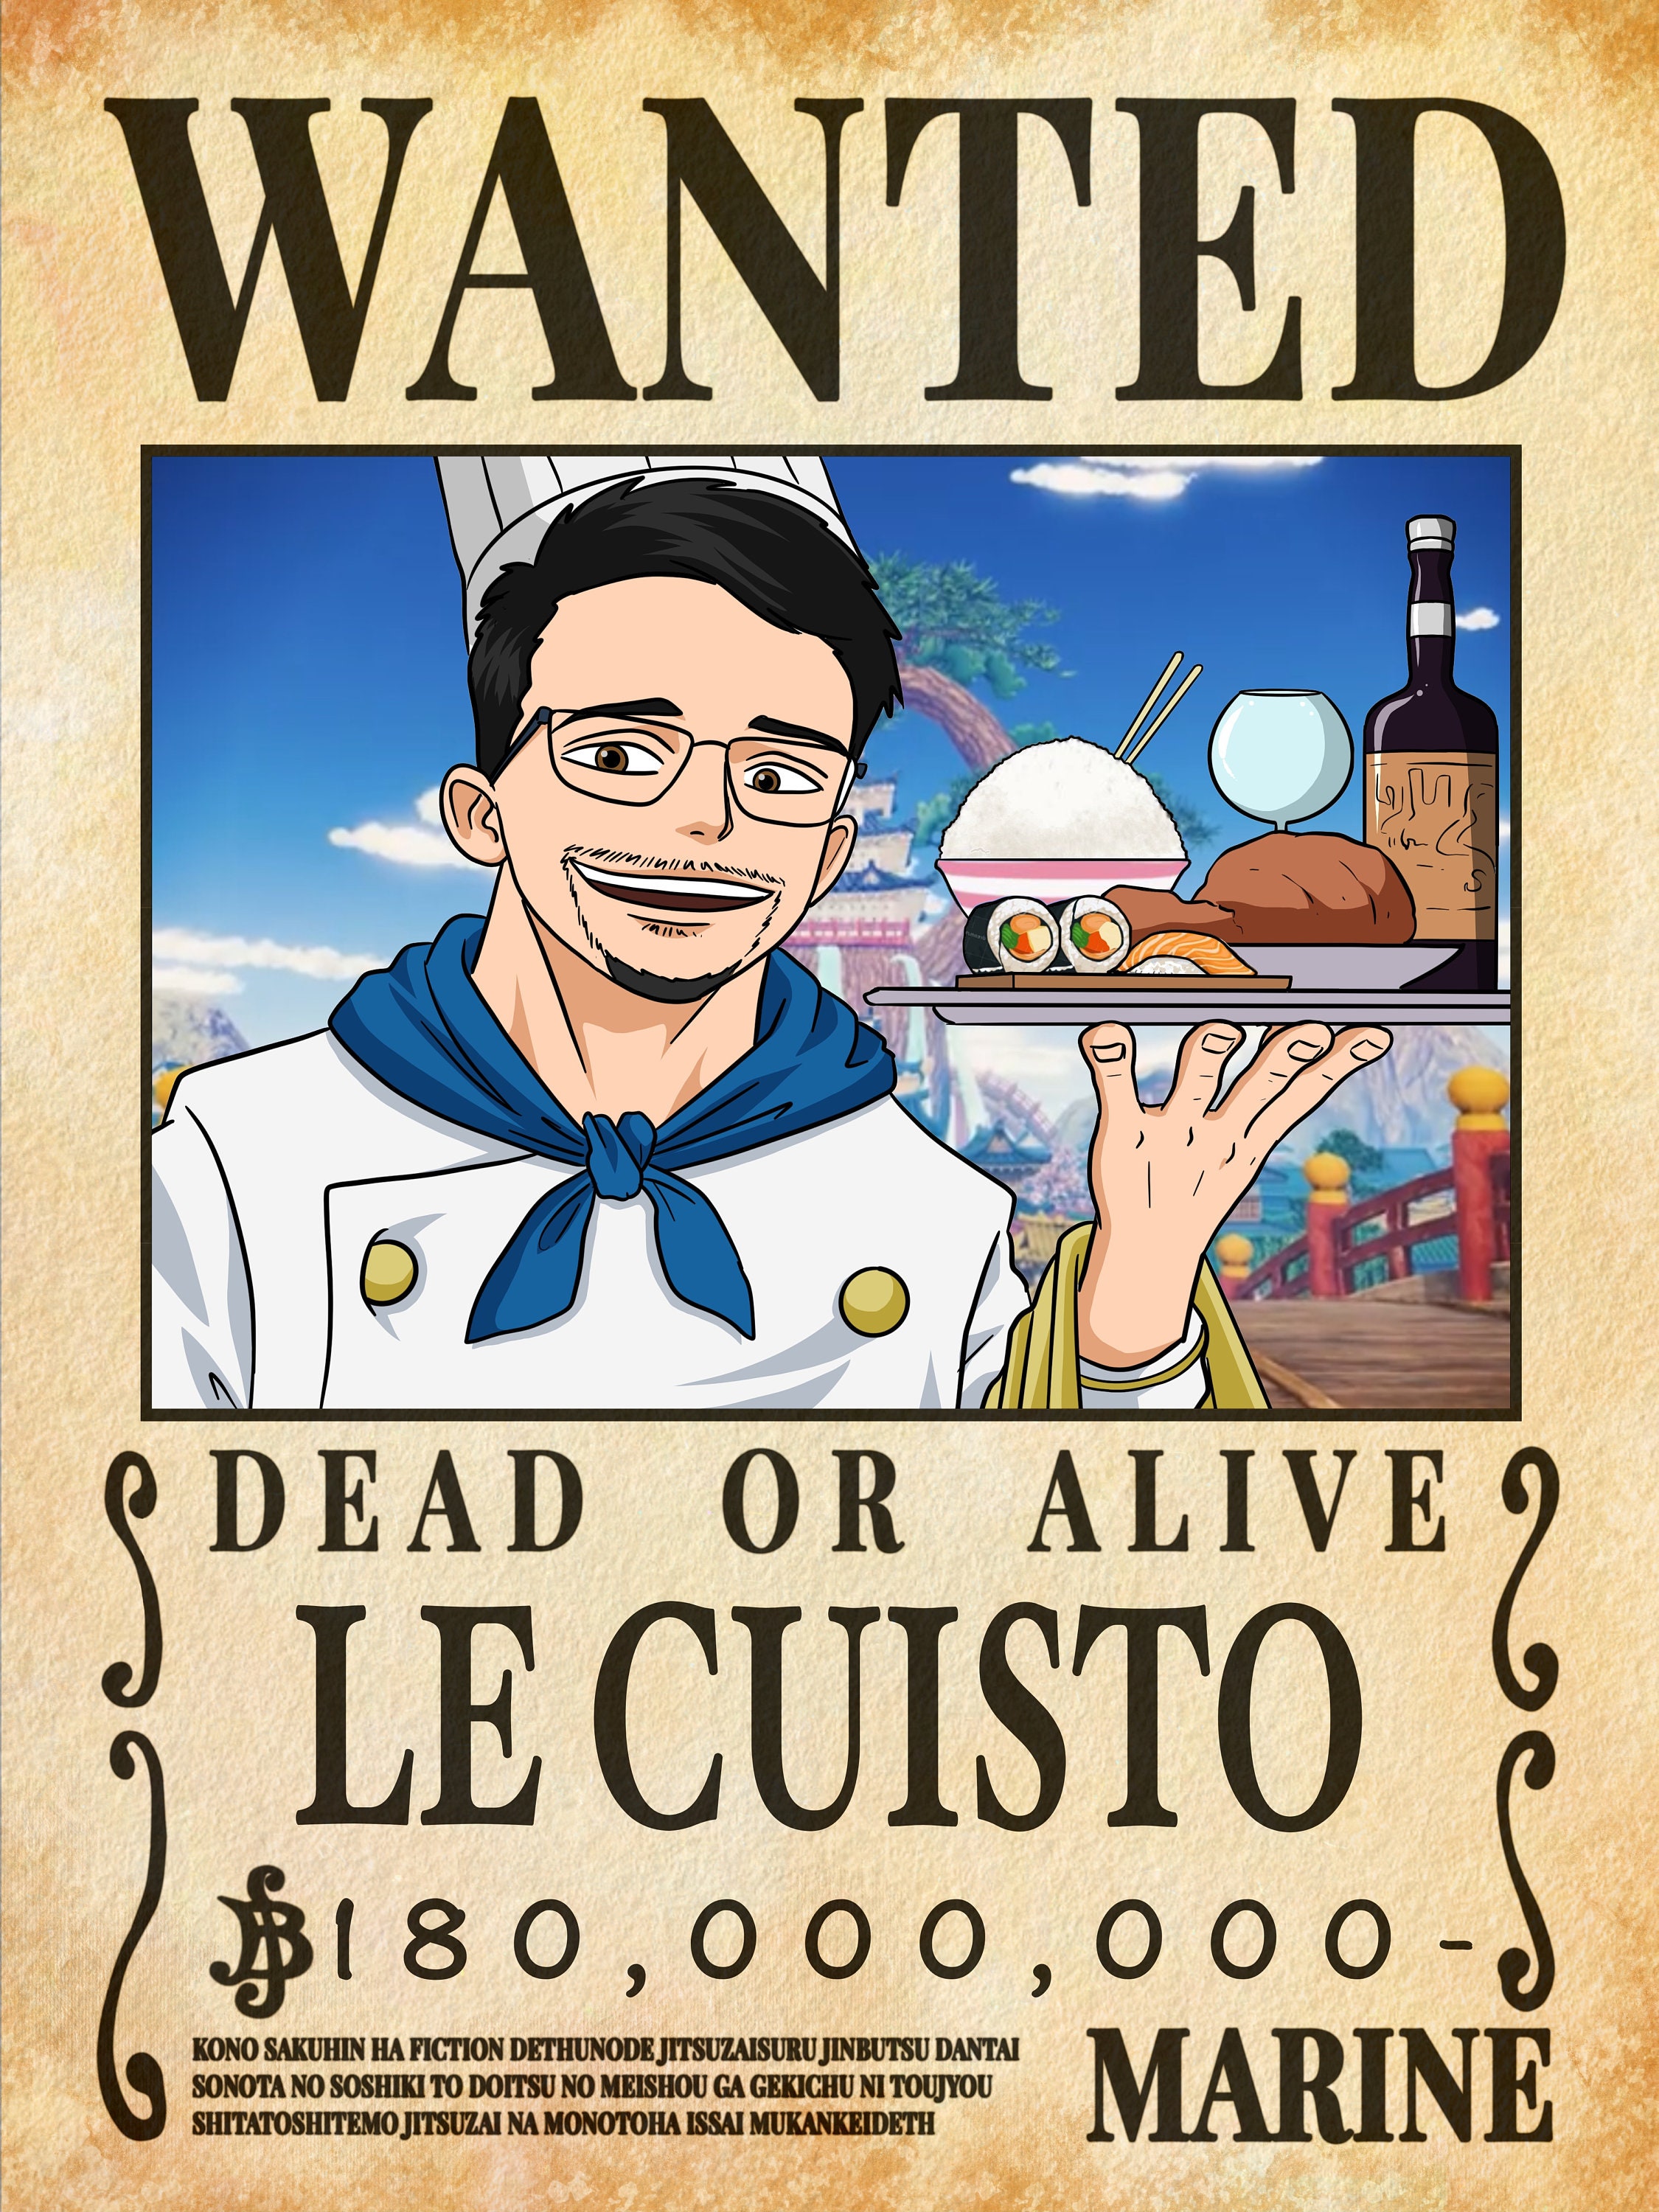 Anime Wanted Poster, Fully Custom Wanted Poster, You in Pirate